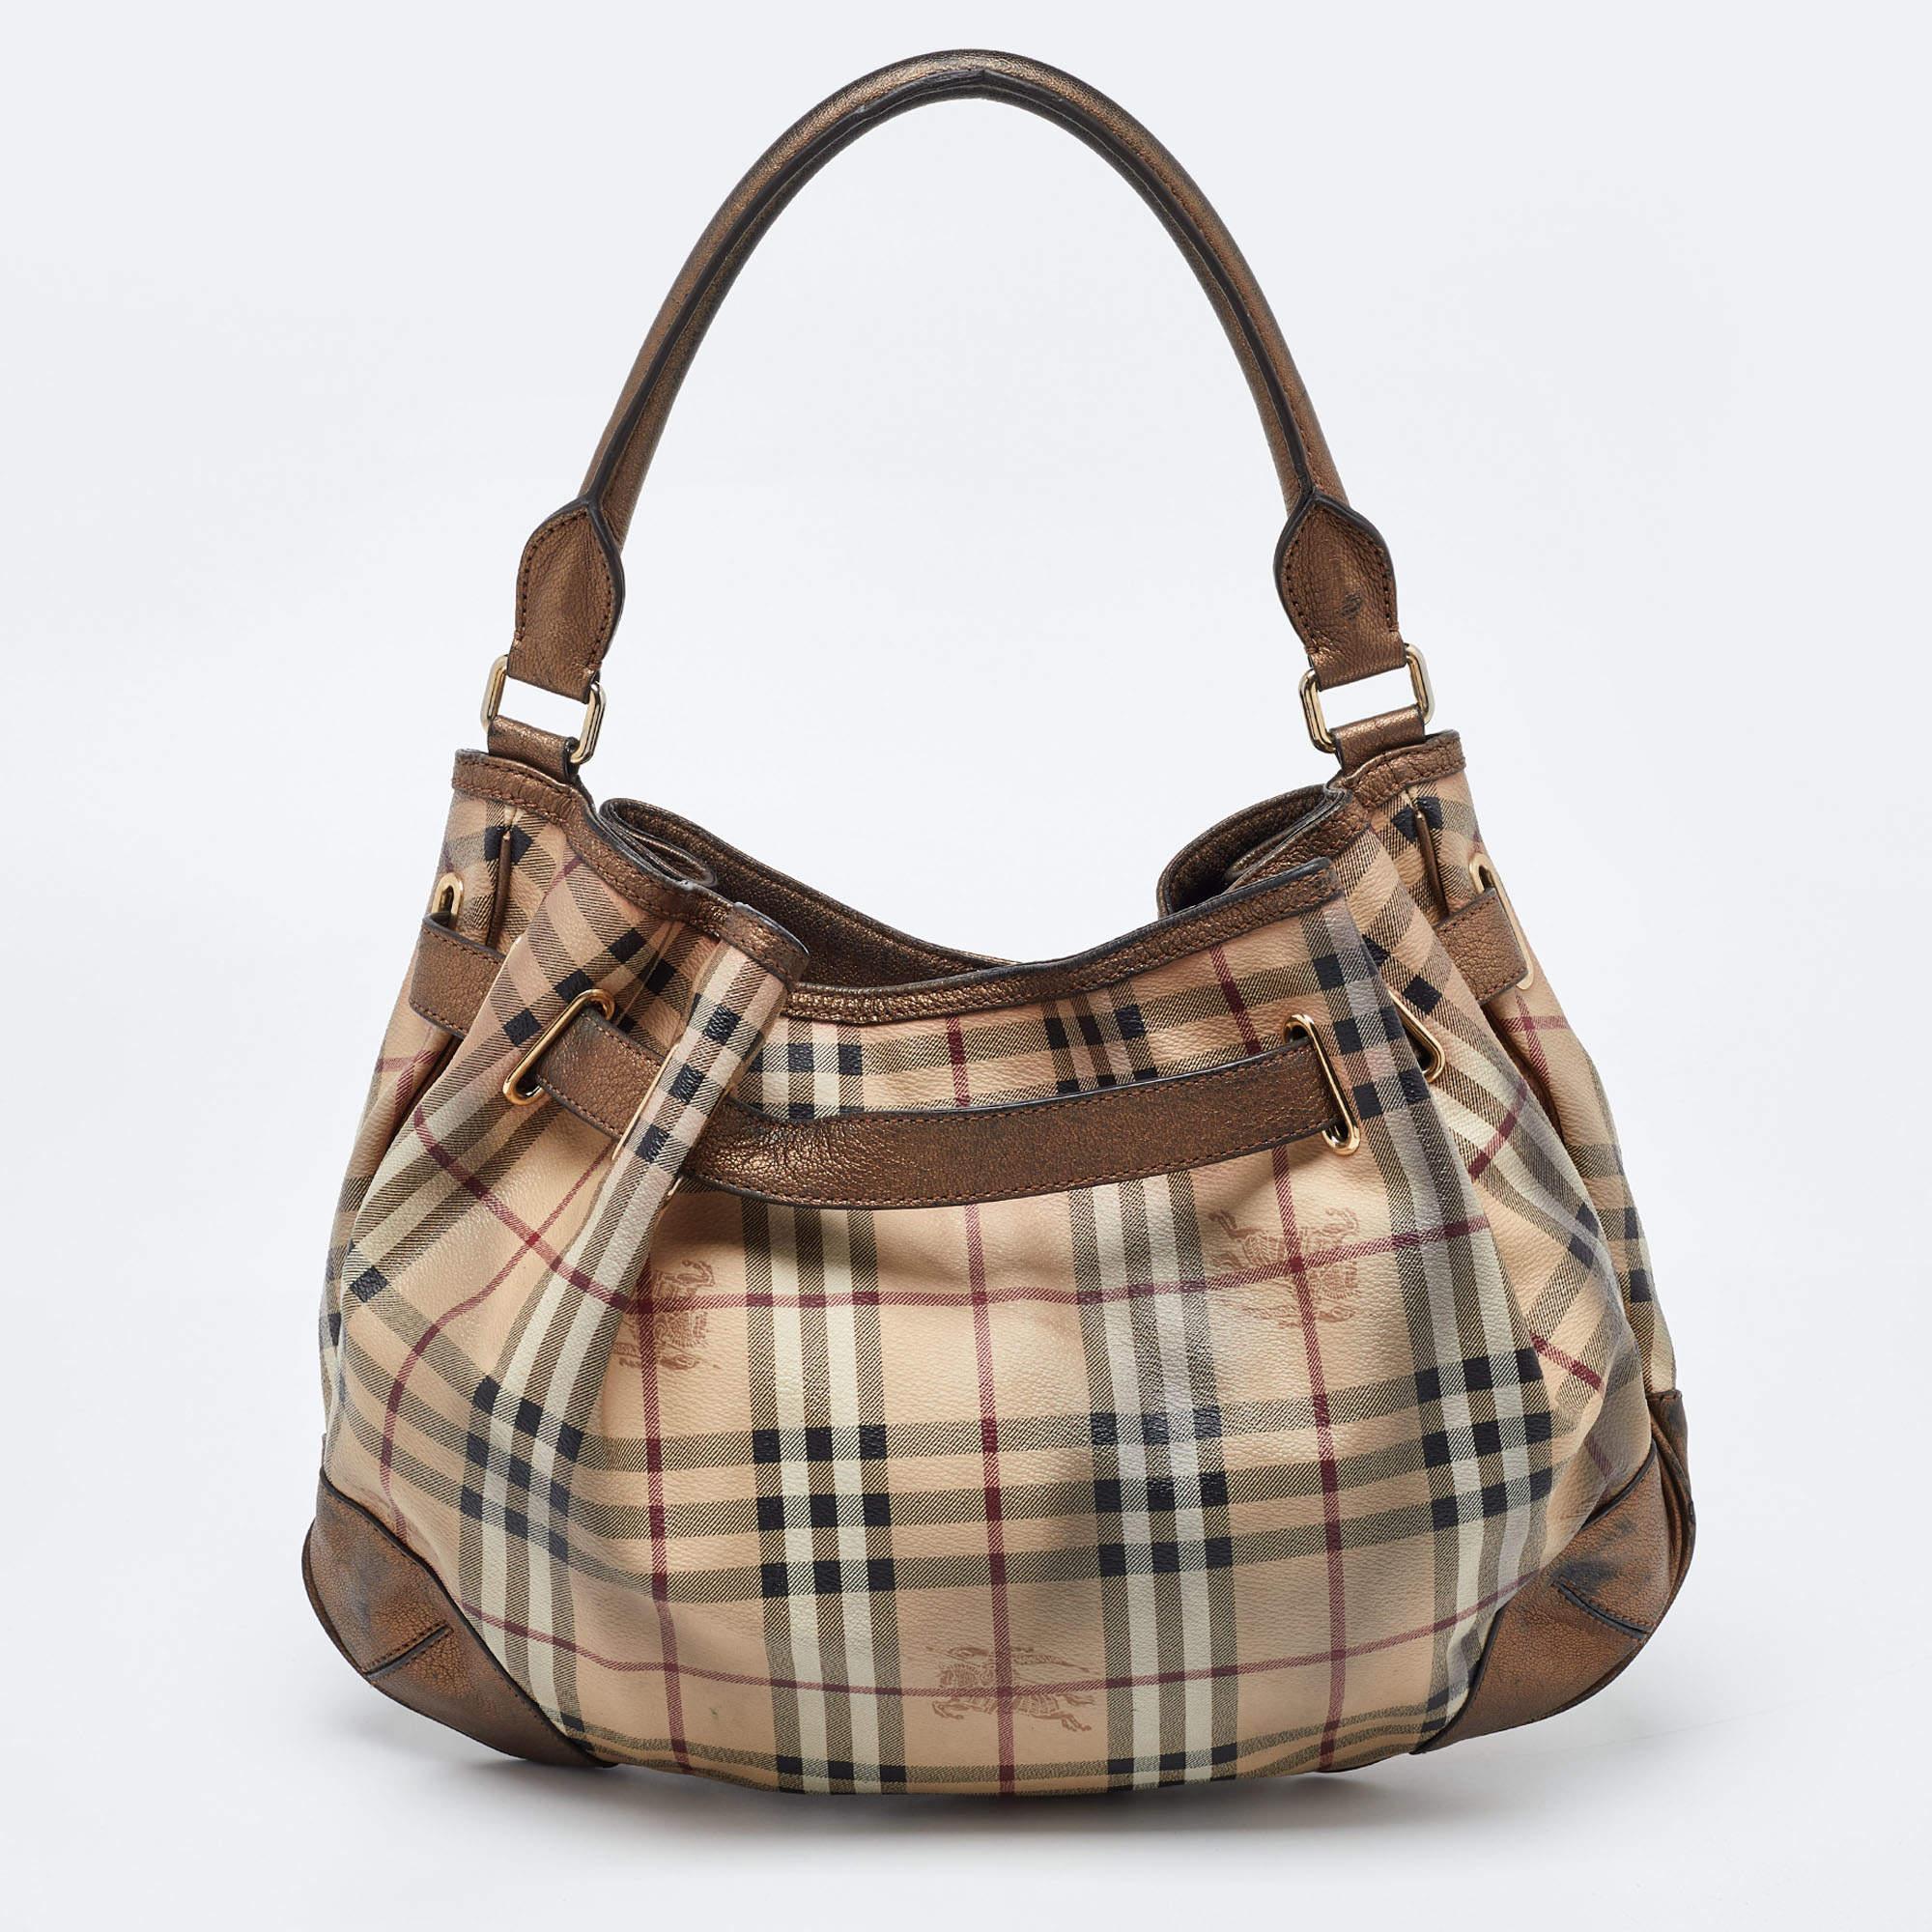 This beautifully stitched Willenmore hobo bag is by Burberry and has been crafted from signature Haymarket Check PVC and leather. With a spacious fabric-lined interior, it will house more than your essentials. Boasting a seamless finish, this